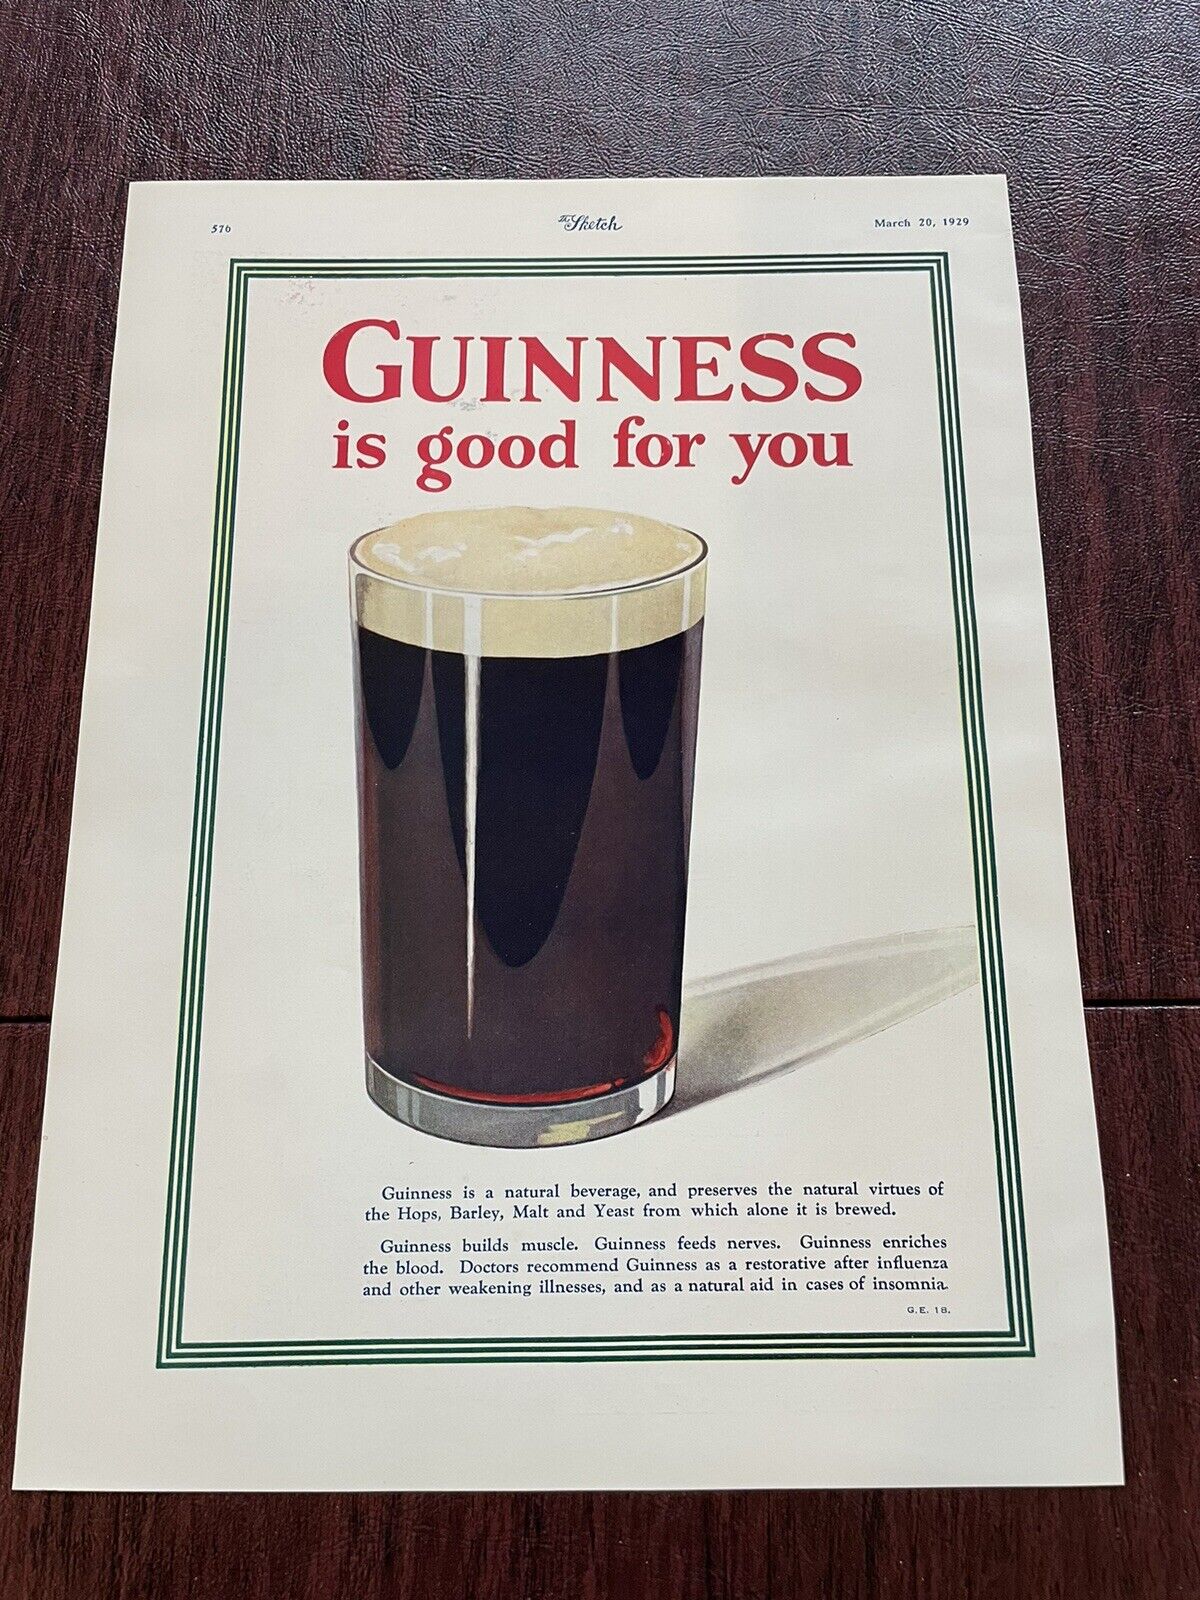 Guinness Vintage Ad Guinness Is Good for You Natural Aid Insomnia() Sketch 1929